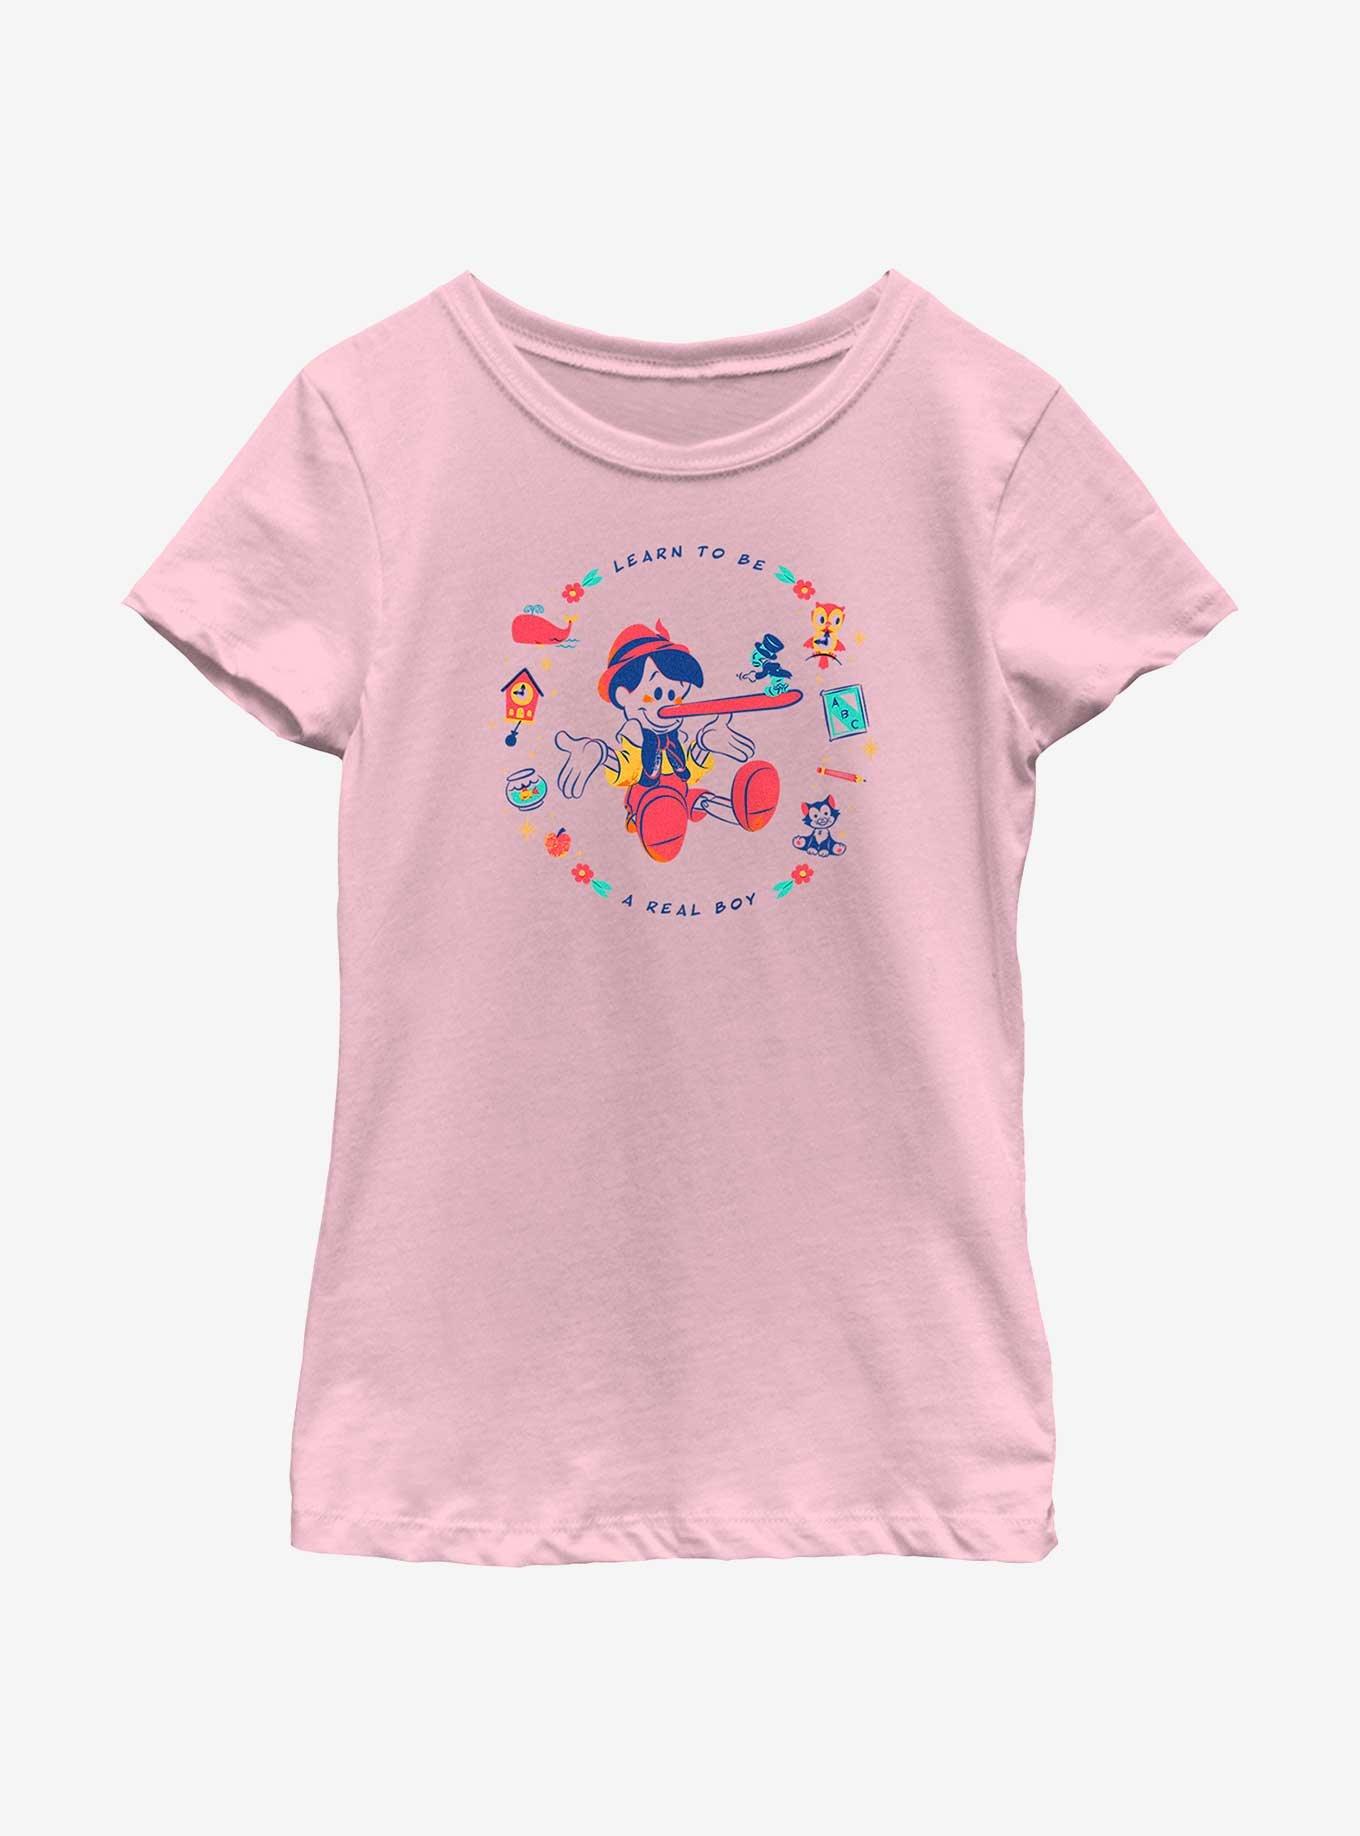 Disney Pinocchio Learn To Be A Real Boy Youth Girls T-Shirt, PINK, hi-res